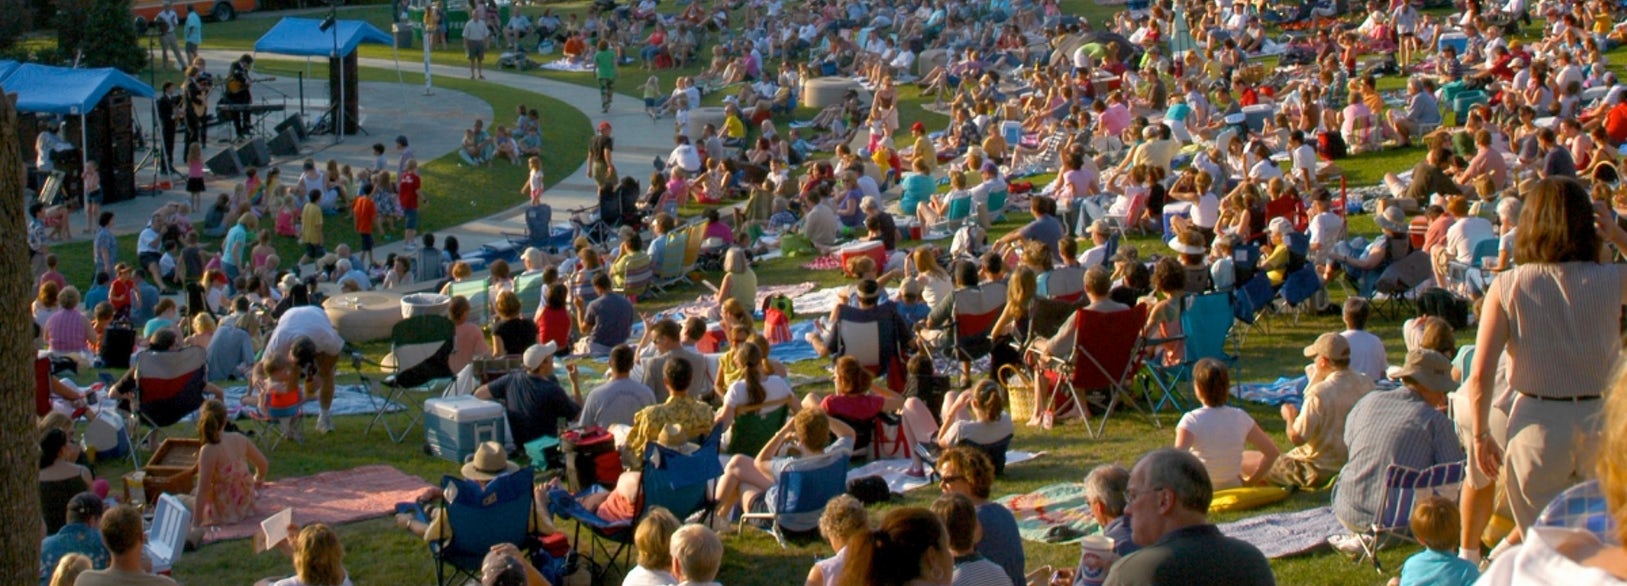 Cool Thursday Concert Series At The Dallas Arboretum With The